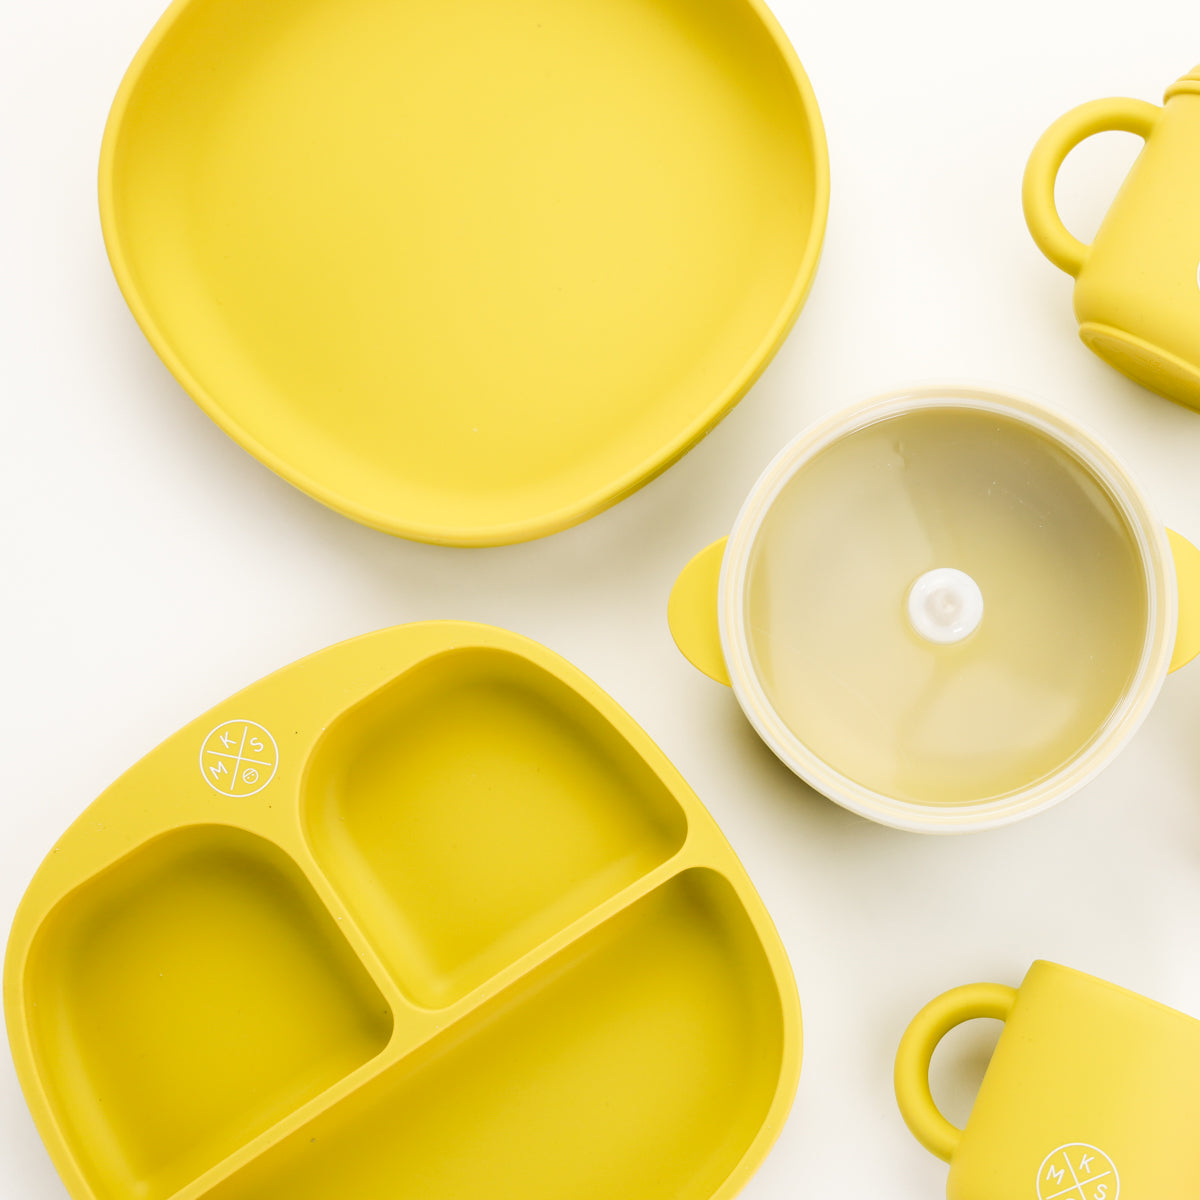 Silicone suction plate - Mustard